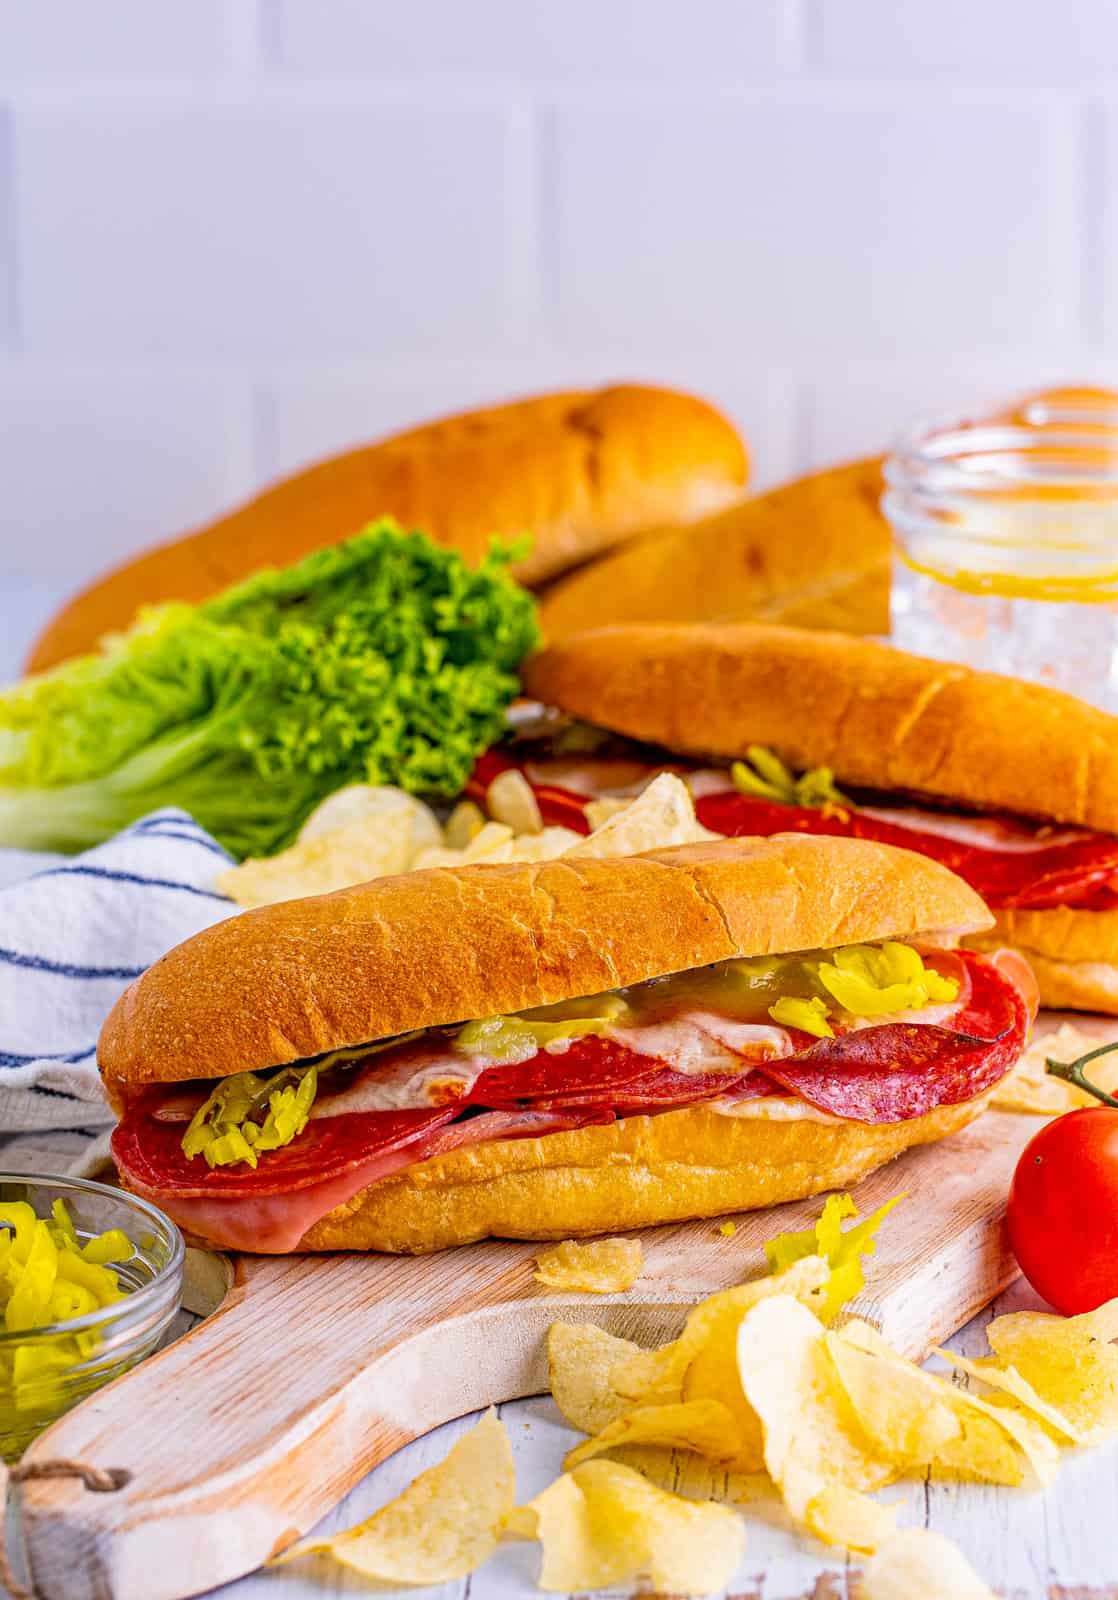 Baked Italian Subs on wooden board with ingredients on it.